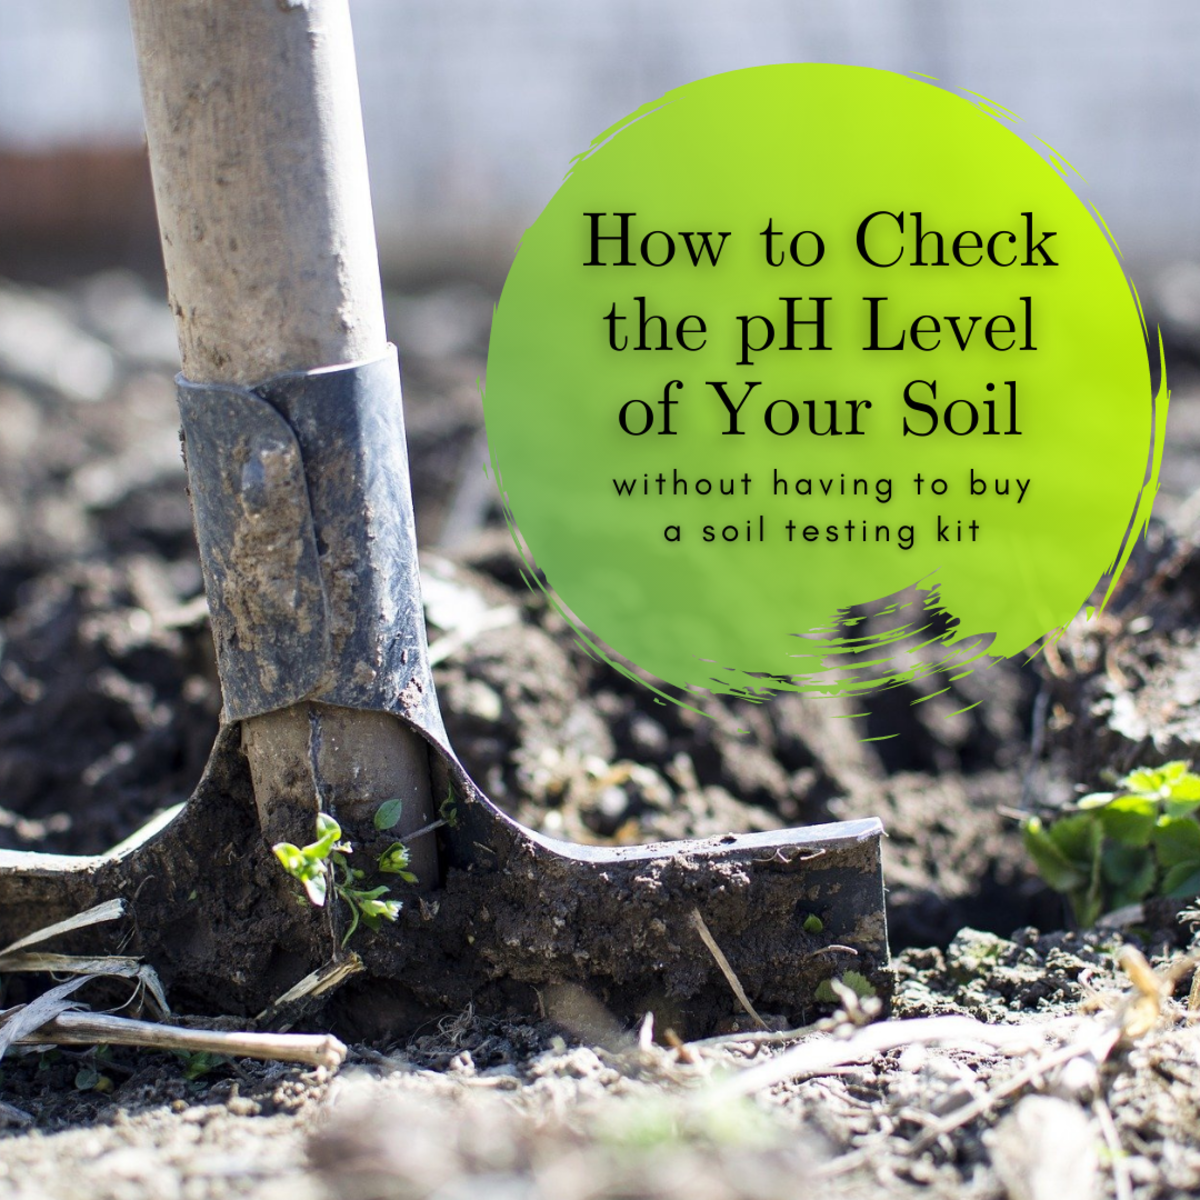 This guide will show you how to check the pH level of your soil without having to purchase an official soil testing kit.